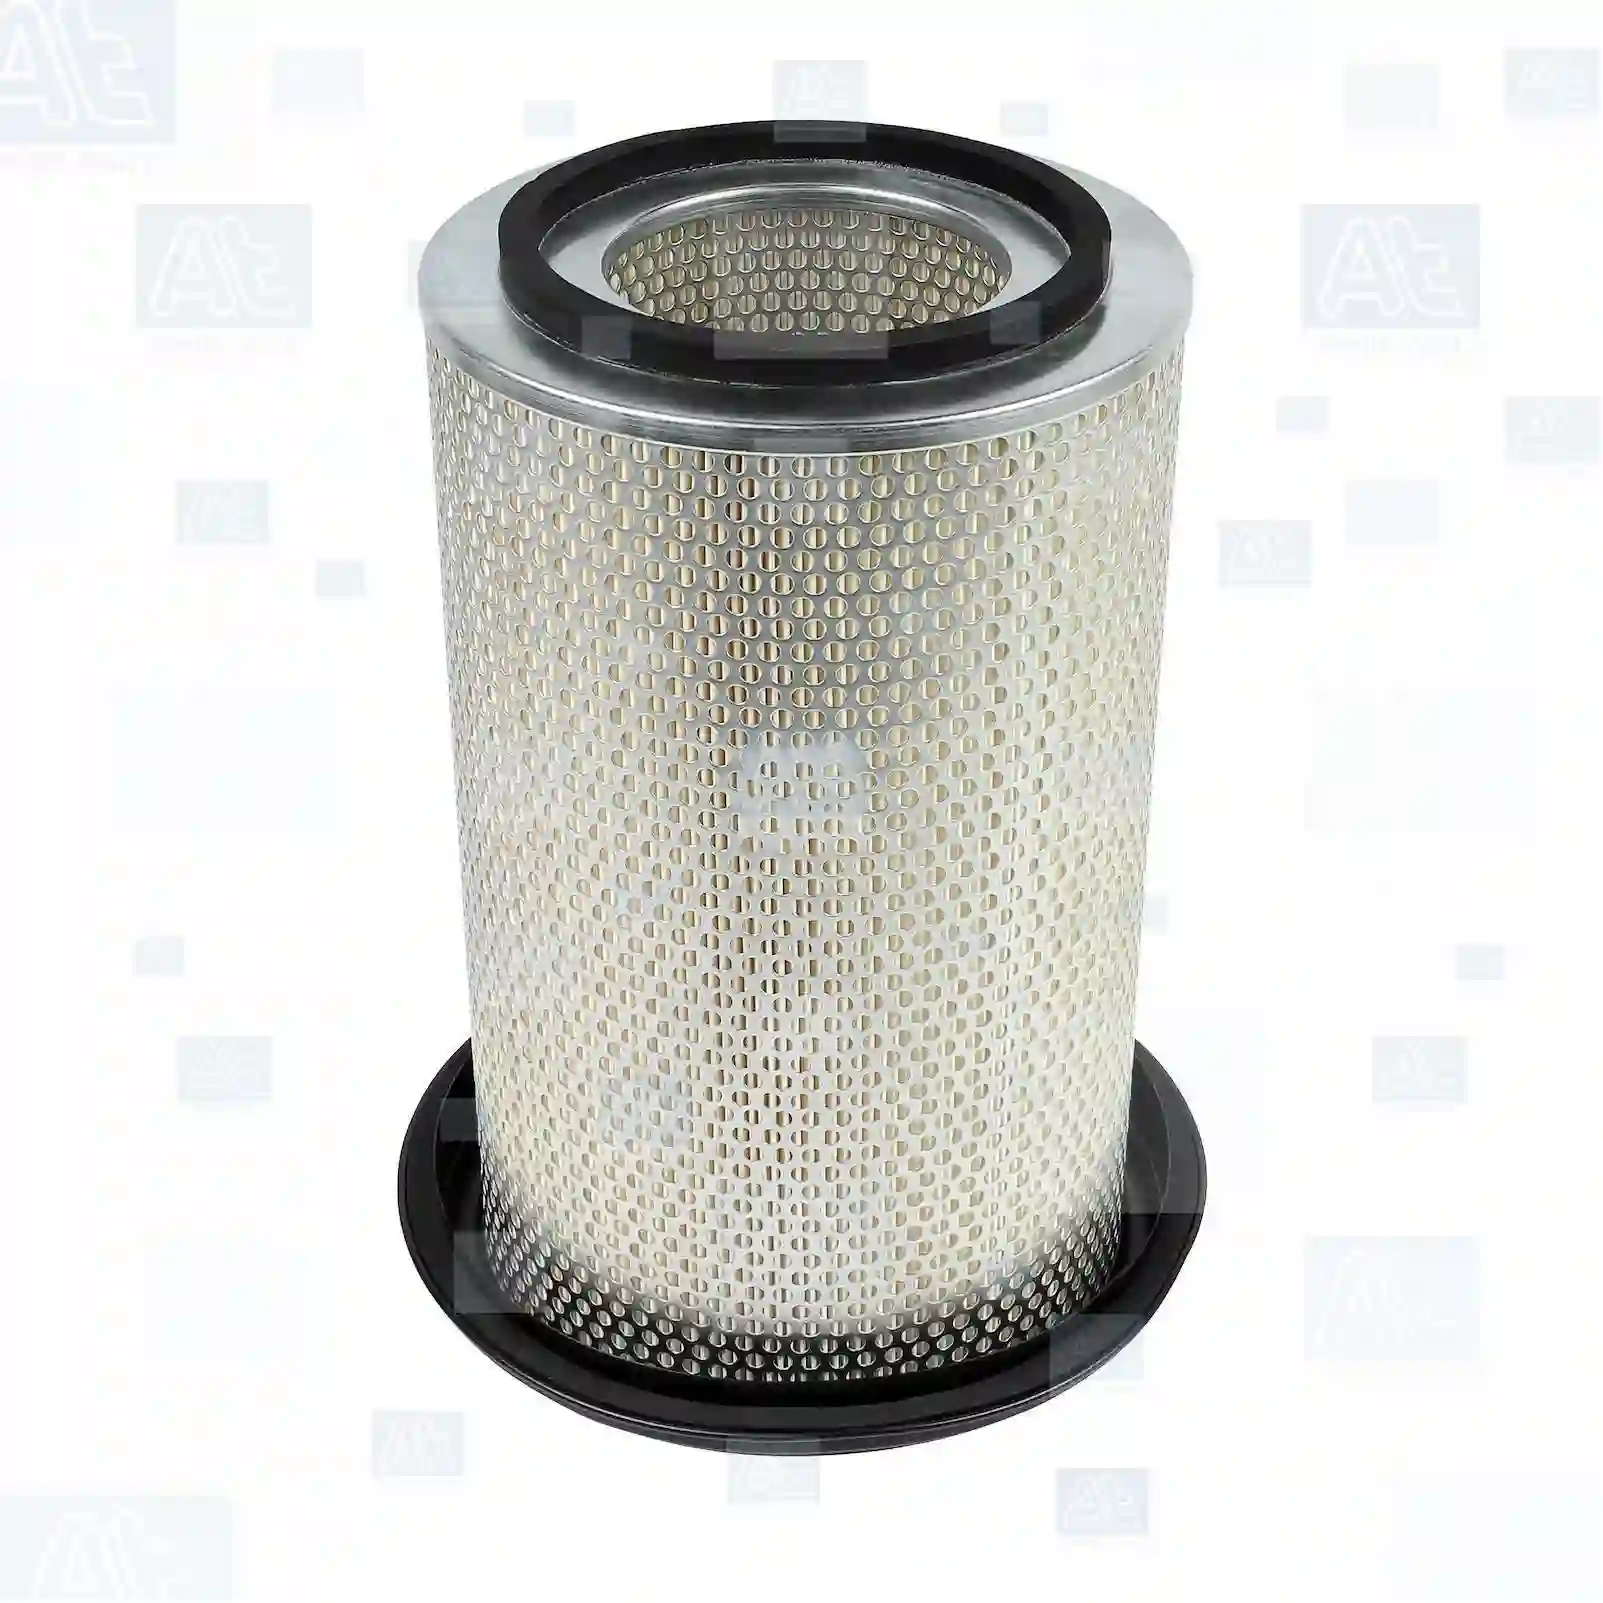 Air filter, 77706918, 10941004, ABU8527, 02164590, 02351325, 02352117, 12153218, 605412970028, 1477102, F280200090020, 02164588, 02164590, 02351325, 02352117, Y03728008, 5011324, 5011555, 93152481, 9974140, 195946205, 02164590, 2164590, AZ23440, AZ23642, HDAM2300, 02164590, 02351325, 02352117, 04544059104, 08183016074, 81083016074, 81083106074, 2872977, 2872977M1, 0010901004, 0010941004, 605412970011, 605412970028, 905412970011, 45399053, 4033128140, 6005019663, R838, 269733, 8319051000E, 8319051043, 83190510430, 1293400011, 12934000111, 195946205, 500858, ZG00812-0008 ||  77706918 At Spare Part | Engine, Accelerator Pedal, Camshaft, Connecting Rod, Crankcase, Crankshaft, Cylinder Head, Engine Suspension Mountings, Exhaust Manifold, Exhaust Gas Recirculation, Filter Kits, Flywheel Housing, General Overhaul Kits, Engine, Intake Manifold, Oil Cleaner, Oil Cooler, Oil Filter, Oil Pump, Oil Sump, Piston & Liner, Sensor & Switch, Timing Case, Turbocharger, Cooling System, Belt Tensioner, Coolant Filter, Coolant Pipe, Corrosion Prevention Agent, Drive, Expansion Tank, Fan, Intercooler, Monitors & Gauges, Radiator, Thermostat, V-Belt / Timing belt, Water Pump, Fuel System, Electronical Injector Unit, Feed Pump, Fuel Filter, cpl., Fuel Gauge Sender,  Fuel Line, Fuel Pump, Fuel Tank, Injection Line Kit, Injection Pump, Exhaust System, Clutch & Pedal, Gearbox, Propeller Shaft, Axles, Brake System, Hubs & Wheels, Suspension, Leaf Spring, Universal Parts / Accessories, Steering, Electrical System, Cabin Air filter, 77706918, 10941004, ABU8527, 02164590, 02351325, 02352117, 12153218, 605412970028, 1477102, F280200090020, 02164588, 02164590, 02351325, 02352117, Y03728008, 5011324, 5011555, 93152481, 9974140, 195946205, 02164590, 2164590, AZ23440, AZ23642, HDAM2300, 02164590, 02351325, 02352117, 04544059104, 08183016074, 81083016074, 81083106074, 2872977, 2872977M1, 0010901004, 0010941004, 605412970011, 605412970028, 905412970011, 45399053, 4033128140, 6005019663, R838, 269733, 8319051000E, 8319051043, 83190510430, 1293400011, 12934000111, 195946205, 500858, ZG00812-0008 ||  77706918 At Spare Part | Engine, Accelerator Pedal, Camshaft, Connecting Rod, Crankcase, Crankshaft, Cylinder Head, Engine Suspension Mountings, Exhaust Manifold, Exhaust Gas Recirculation, Filter Kits, Flywheel Housing, General Overhaul Kits, Engine, Intake Manifold, Oil Cleaner, Oil Cooler, Oil Filter, Oil Pump, Oil Sump, Piston & Liner, Sensor & Switch, Timing Case, Turbocharger, Cooling System, Belt Tensioner, Coolant Filter, Coolant Pipe, Corrosion Prevention Agent, Drive, Expansion Tank, Fan, Intercooler, Monitors & Gauges, Radiator, Thermostat, V-Belt / Timing belt, Water Pump, Fuel System, Electronical Injector Unit, Feed Pump, Fuel Filter, cpl., Fuel Gauge Sender,  Fuel Line, Fuel Pump, Fuel Tank, Injection Line Kit, Injection Pump, Exhaust System, Clutch & Pedal, Gearbox, Propeller Shaft, Axles, Brake System, Hubs & Wheels, Suspension, Leaf Spring, Universal Parts / Accessories, Steering, Electrical System, Cabin